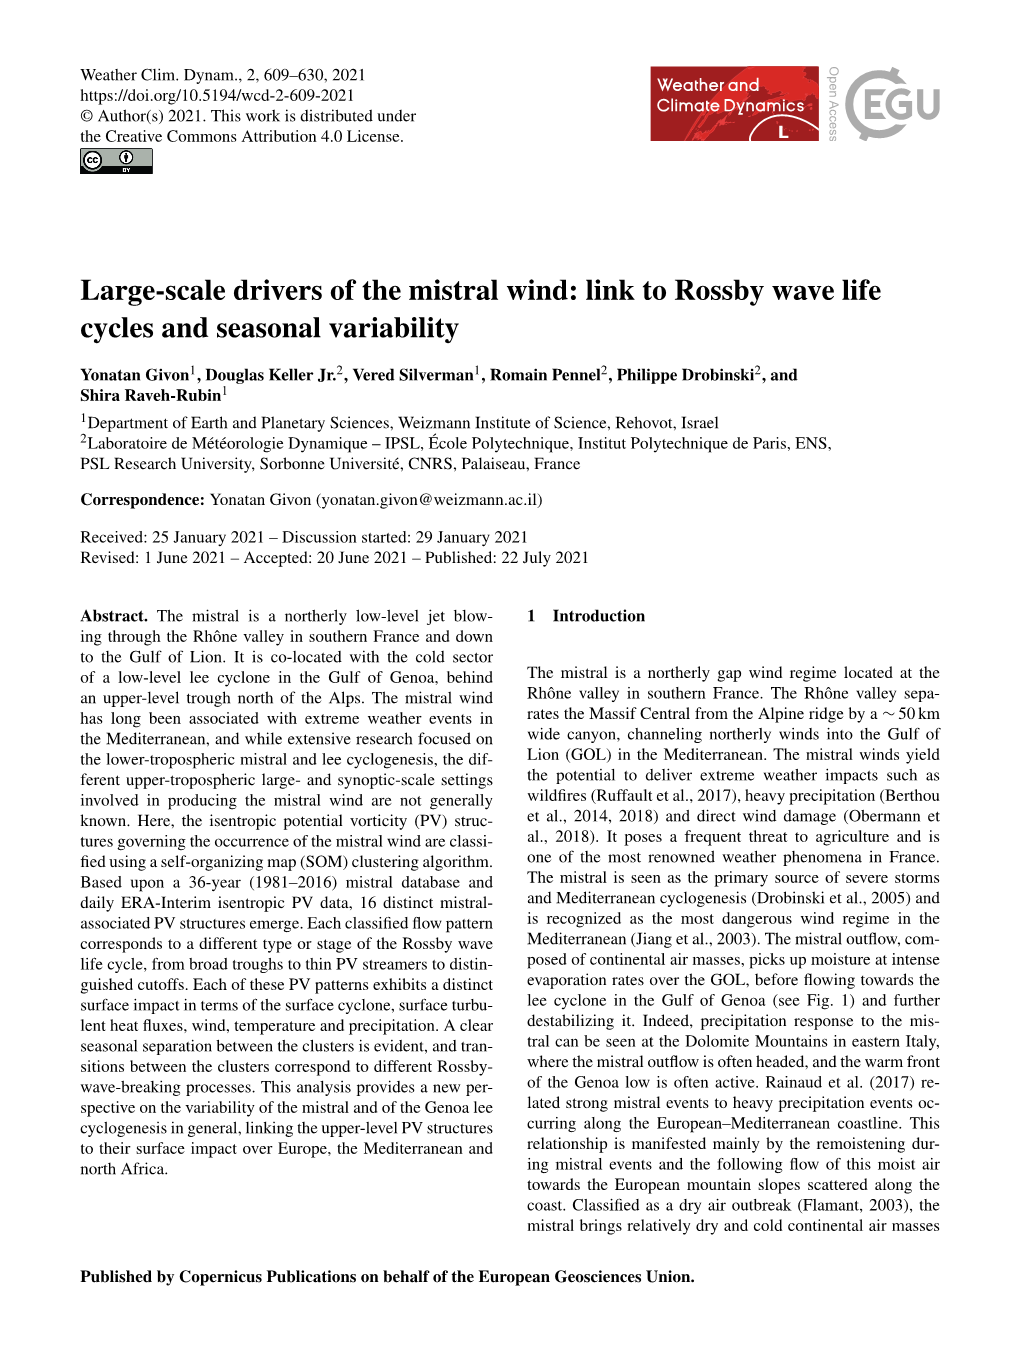 Large-Scale Drivers of the Mistral Wind: Link to Rossby Wave Life Cycles and Seasonal Variability